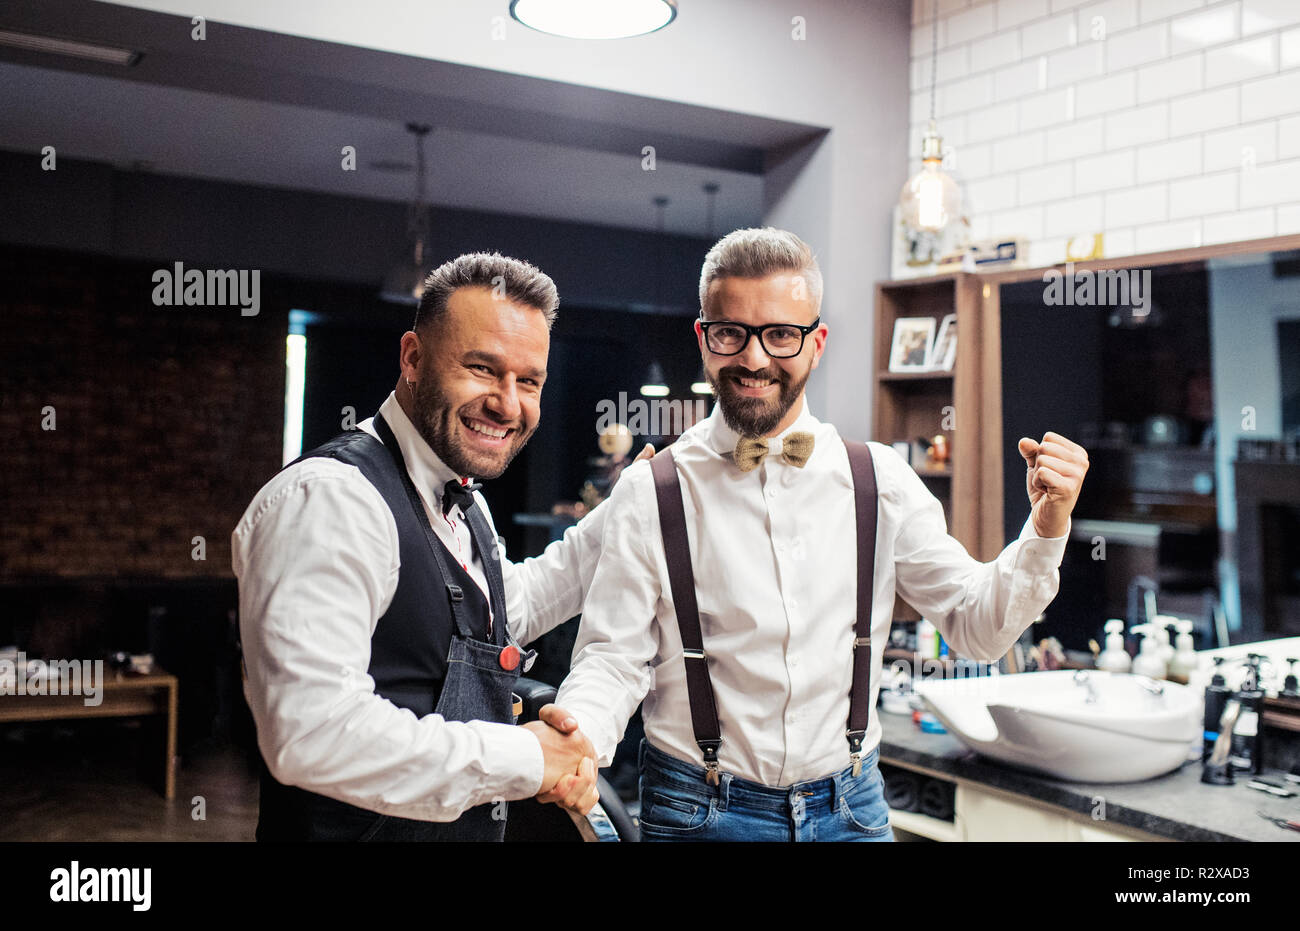 Hipster man client shaking hands with haidresser and hairstylist in barber shop. Stock Photo